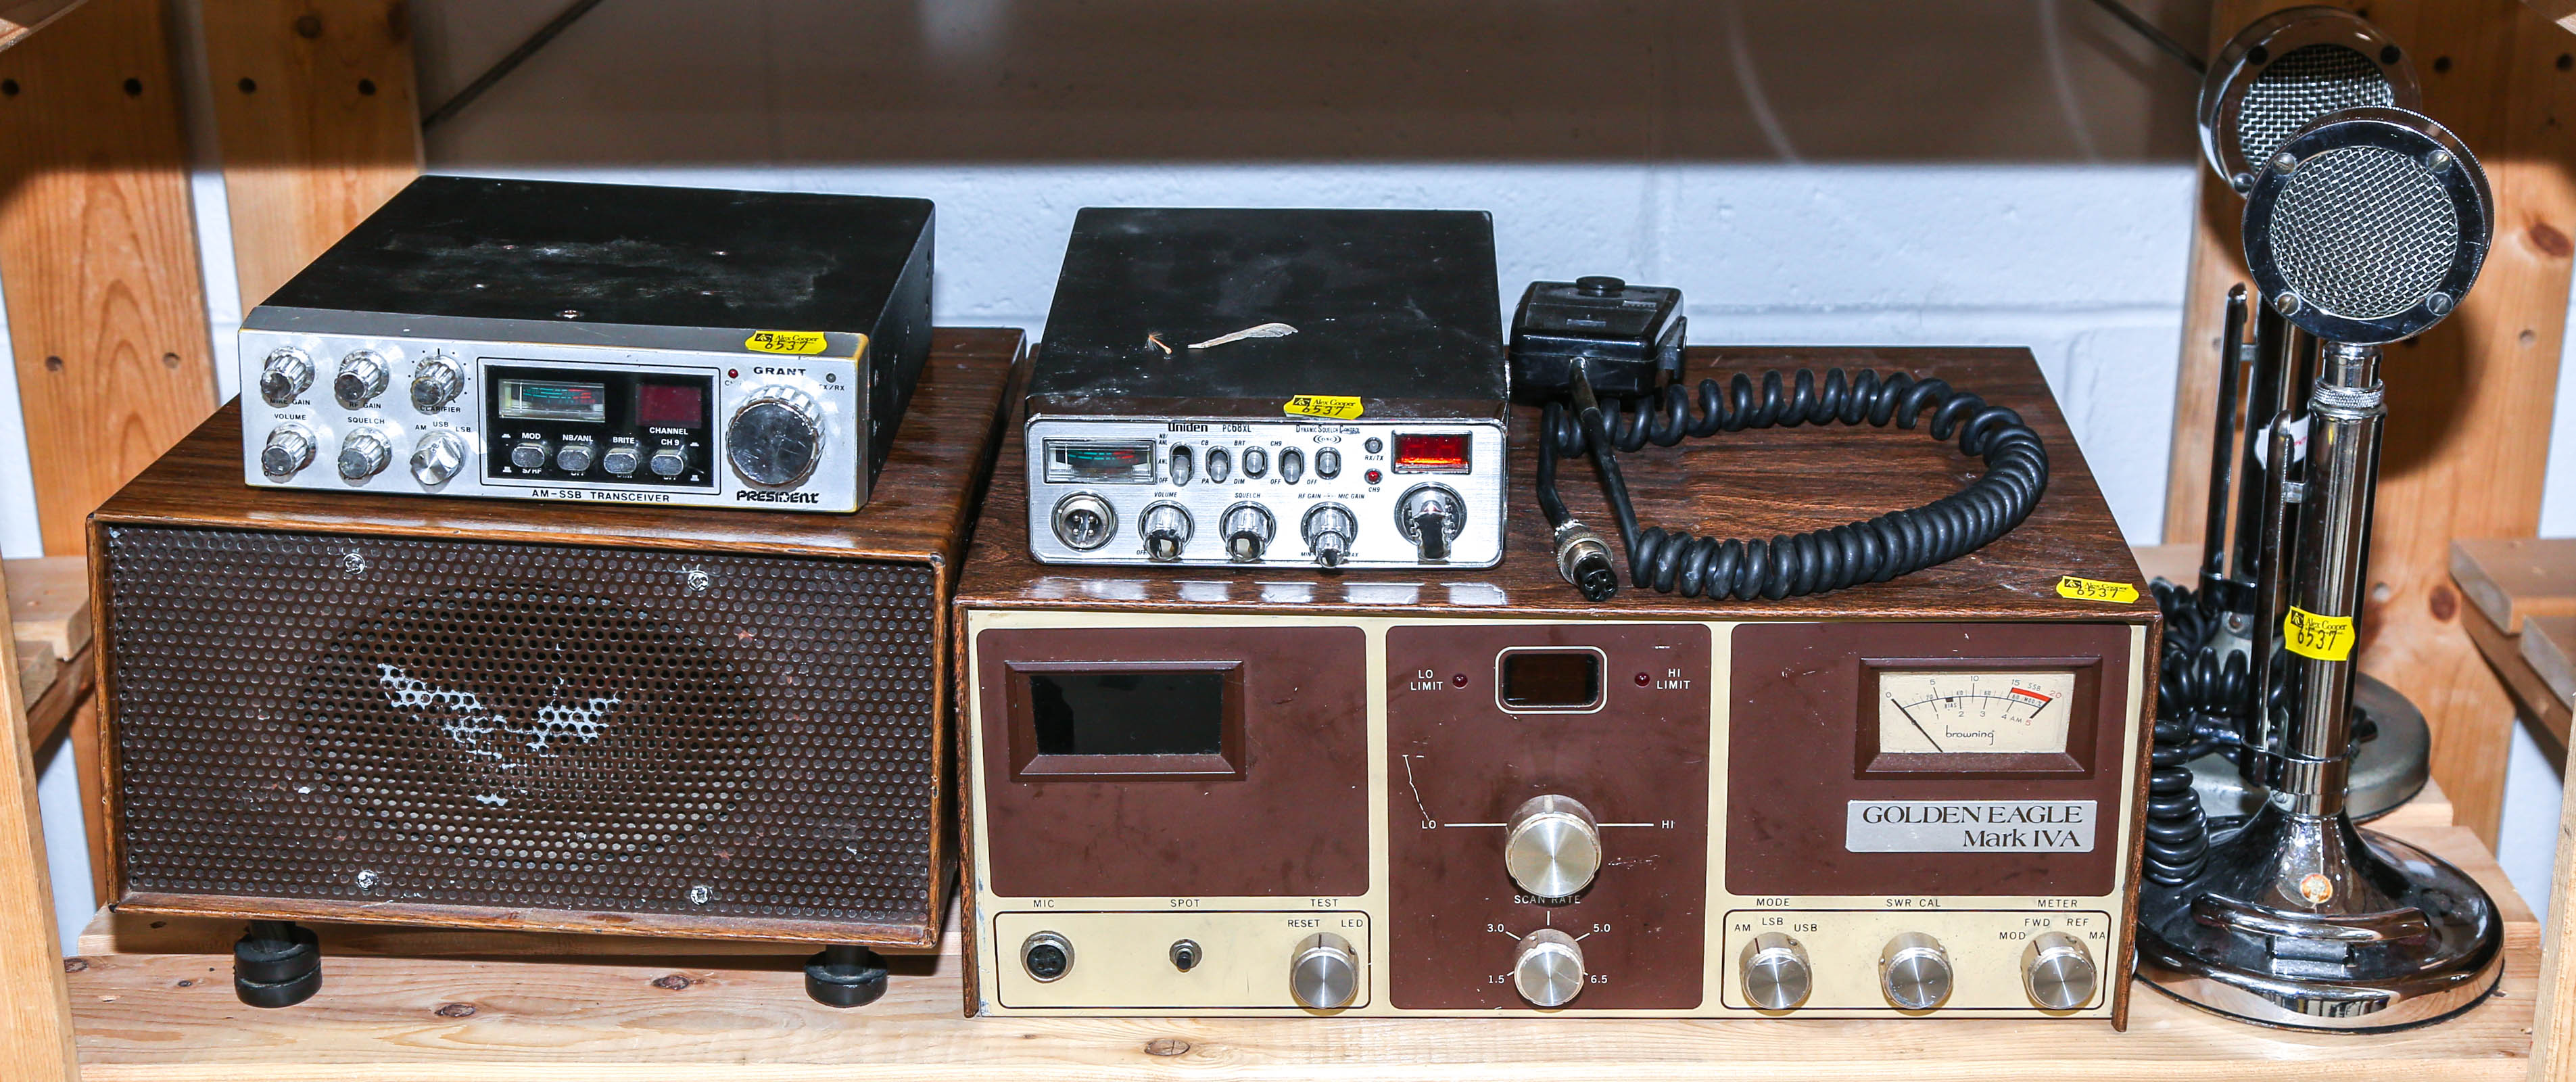 GROUPING OF VINTAGE AUDIO EQUIPMENT 2e93d5